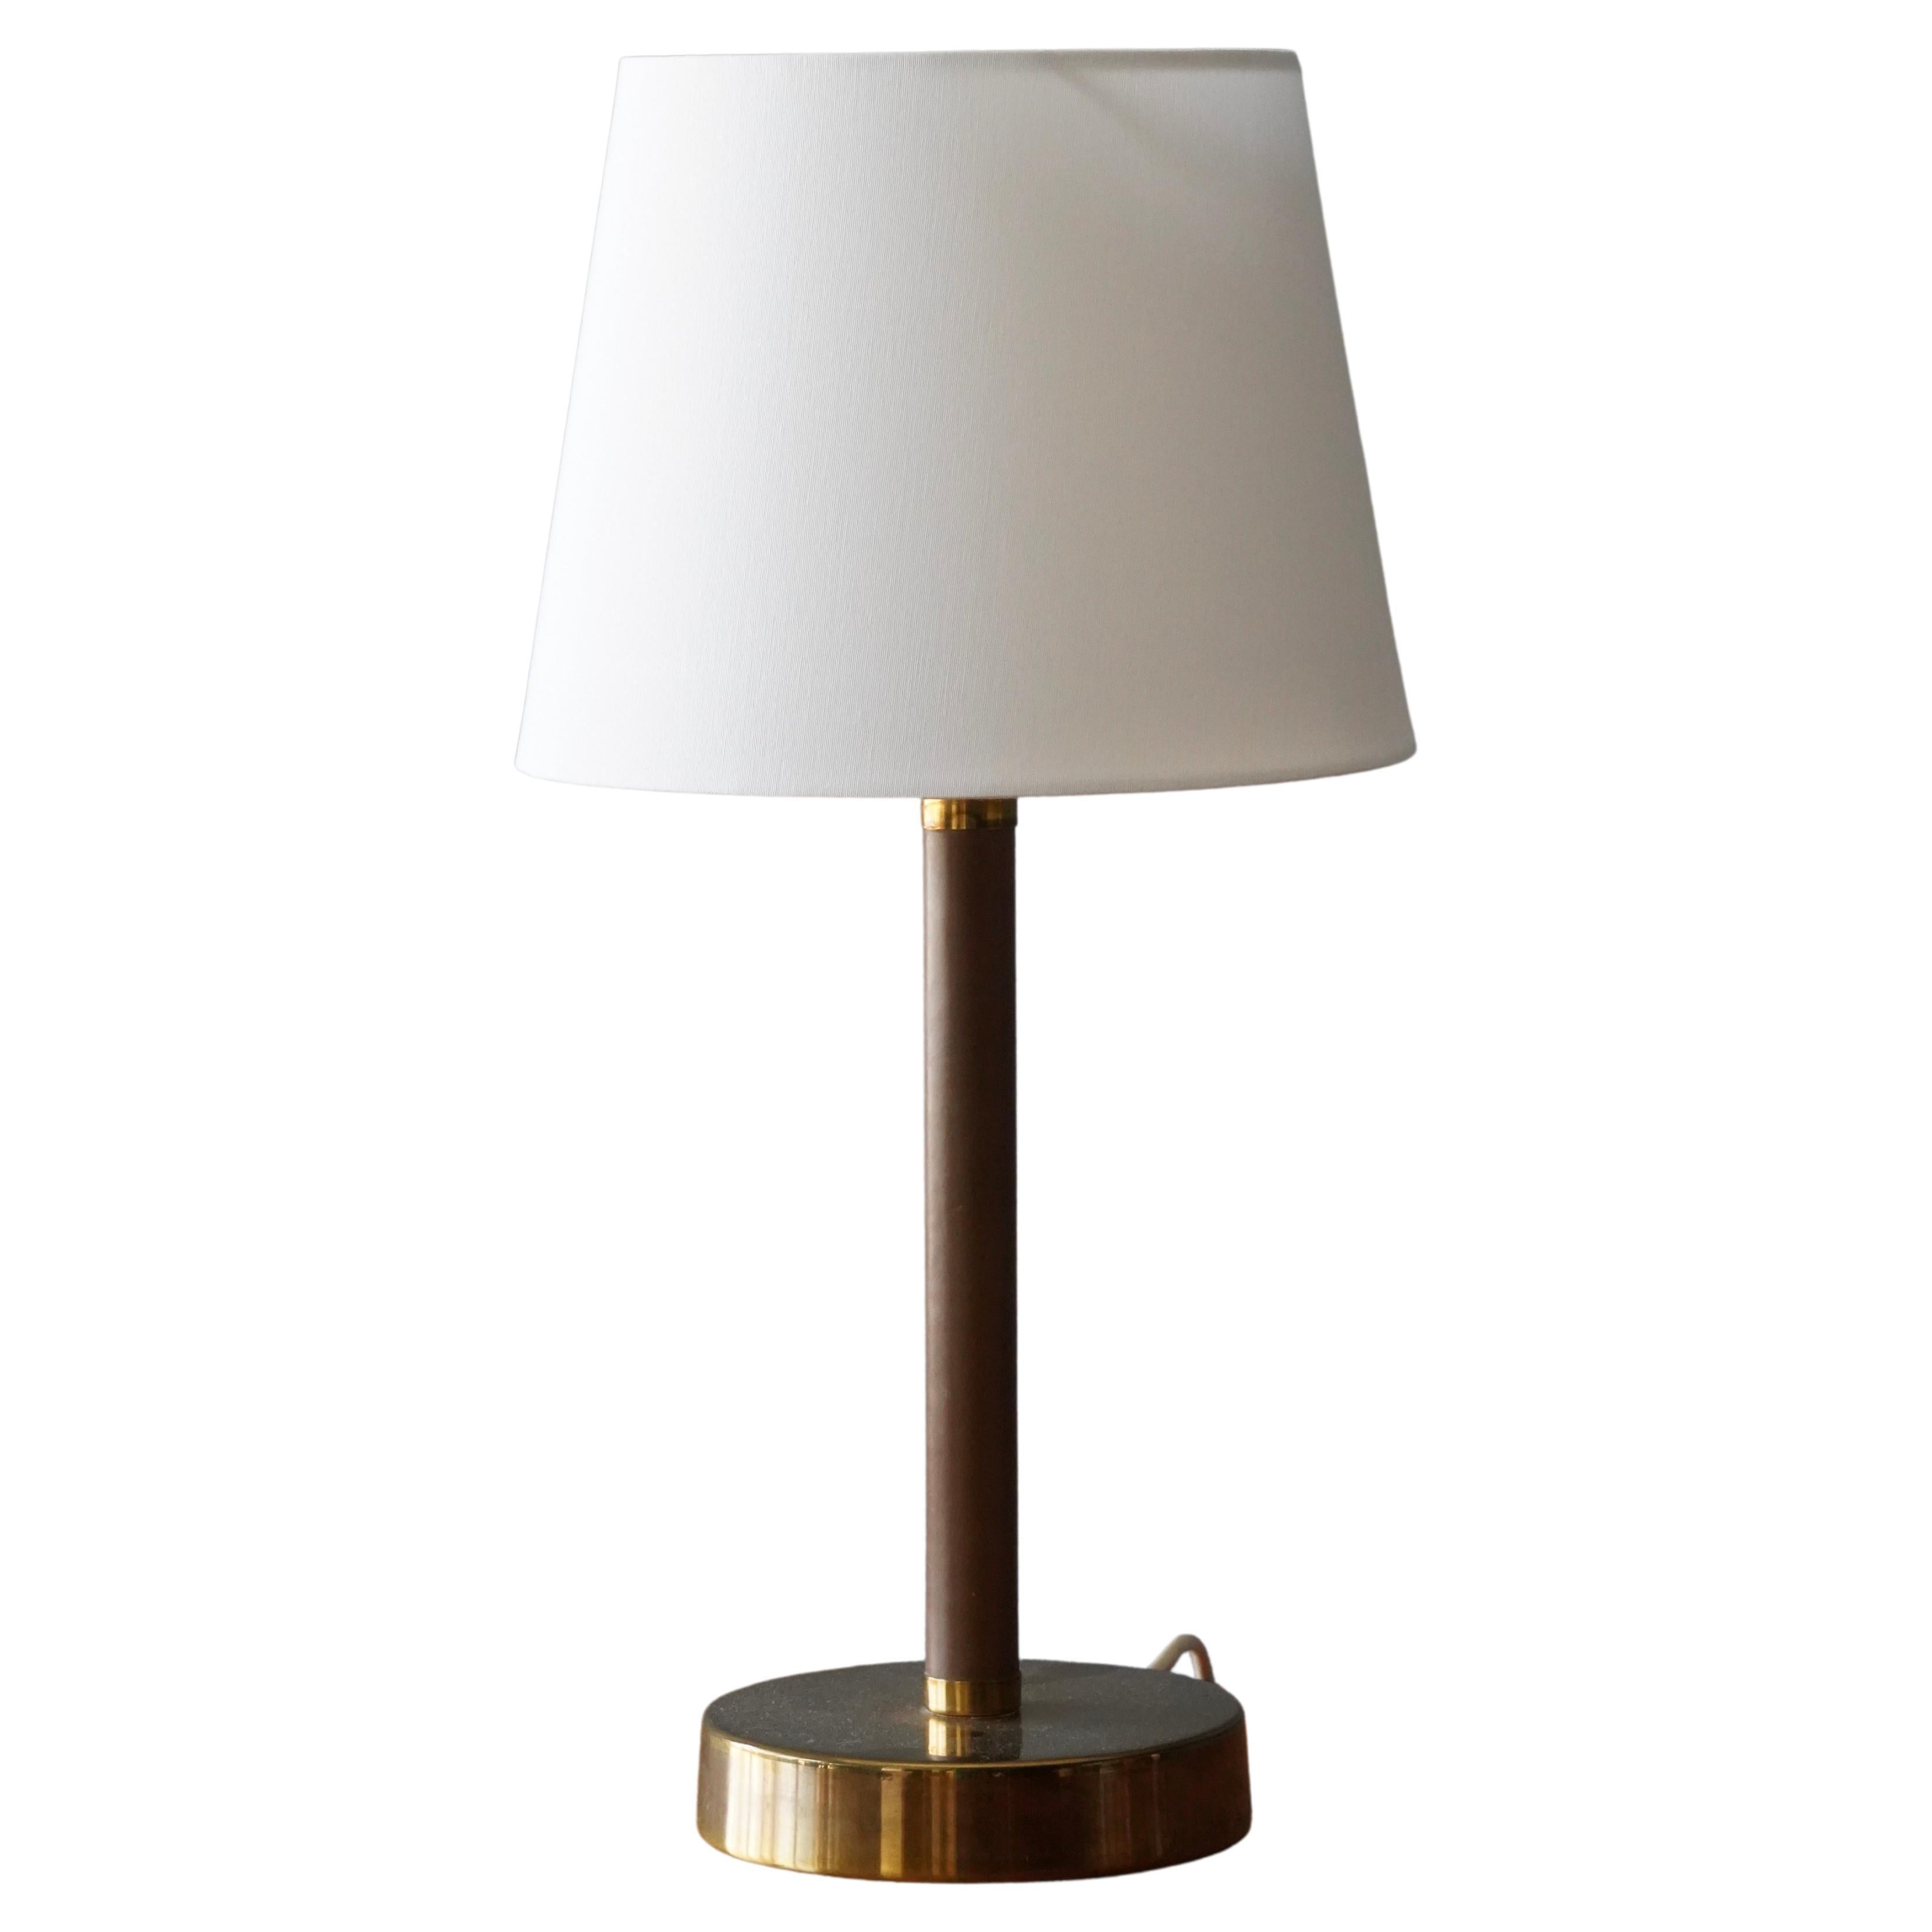 ASEA, Table Lamp, Brass, Brown Leather, Sweden, 1950s